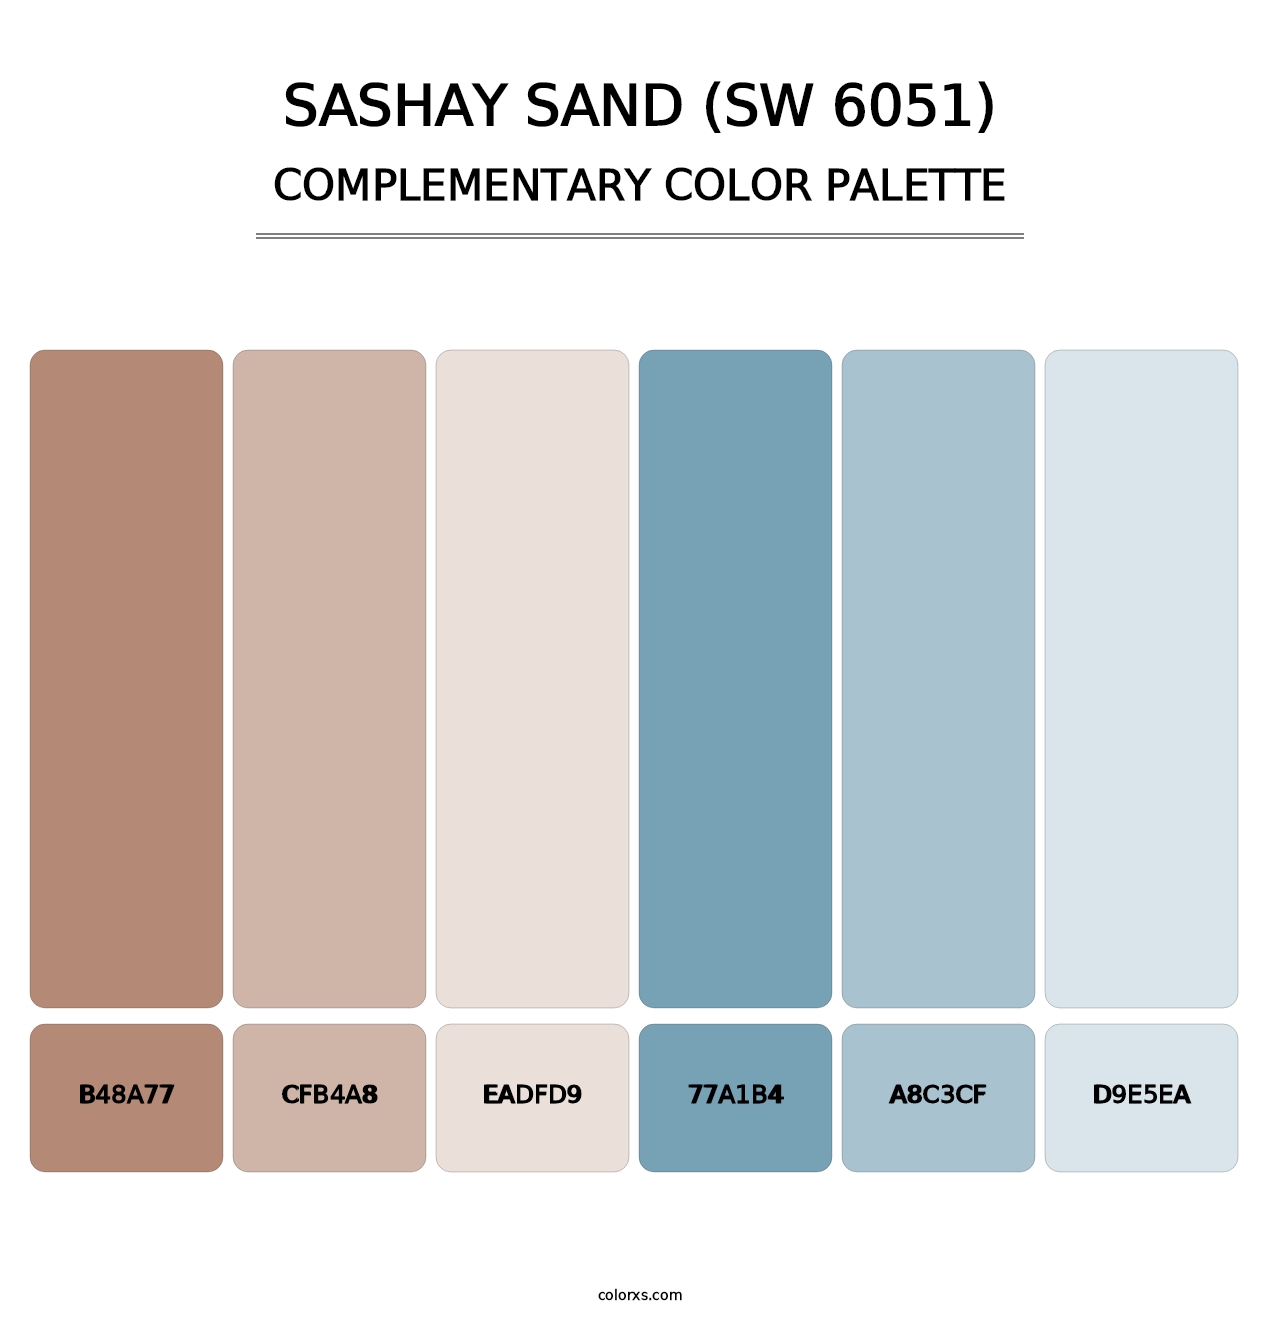 Sashay Sand (SW 6051) - Complementary Color Palette